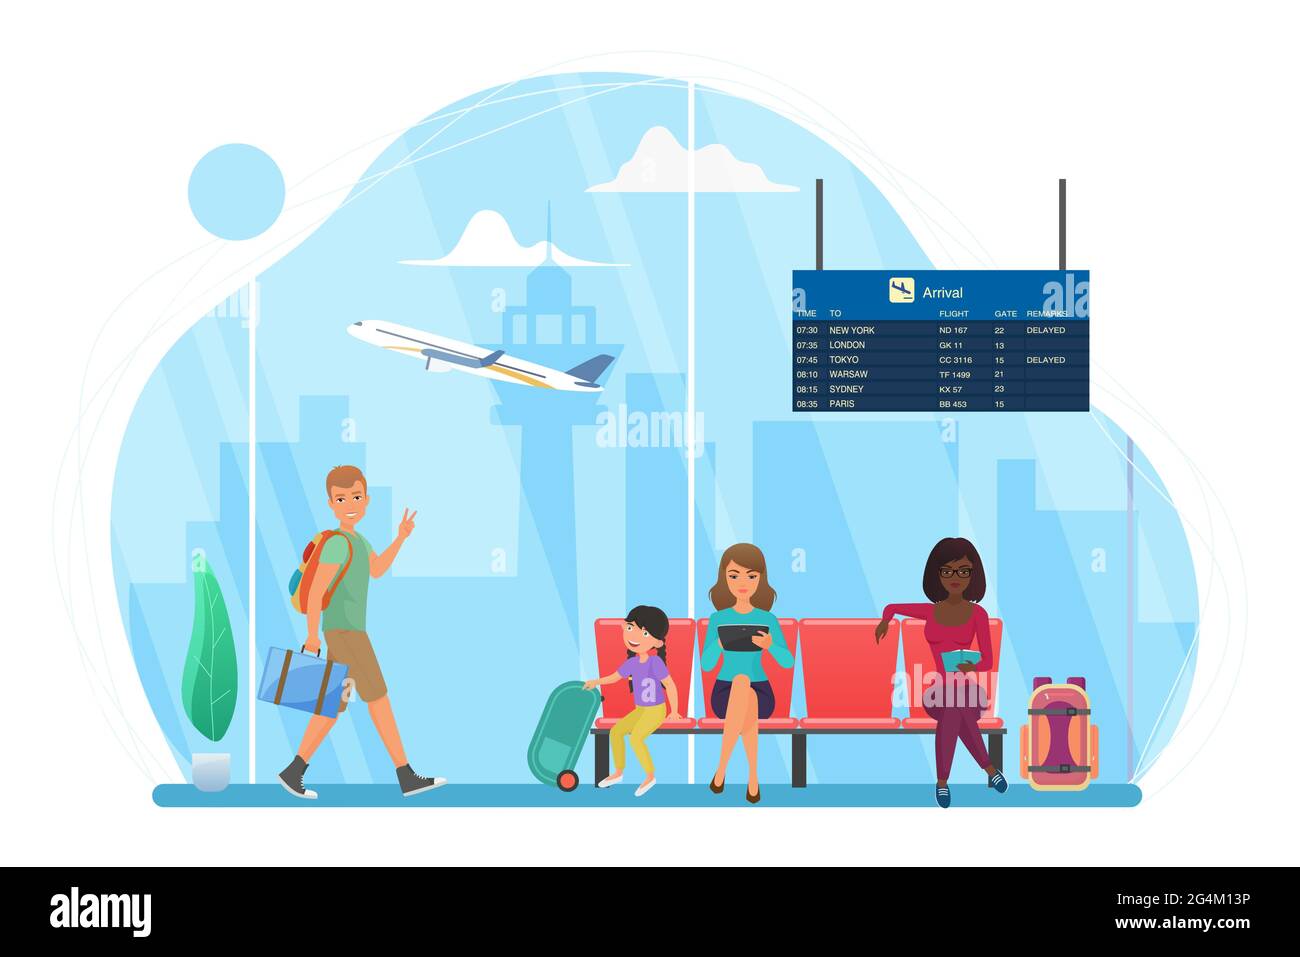 Happy people travel, wait at airport for trip flight vector illustration. Cartoon man tourist character walking, young mother with kid sitting on seats, woman reading in waiting area isolated on white Stock Vector